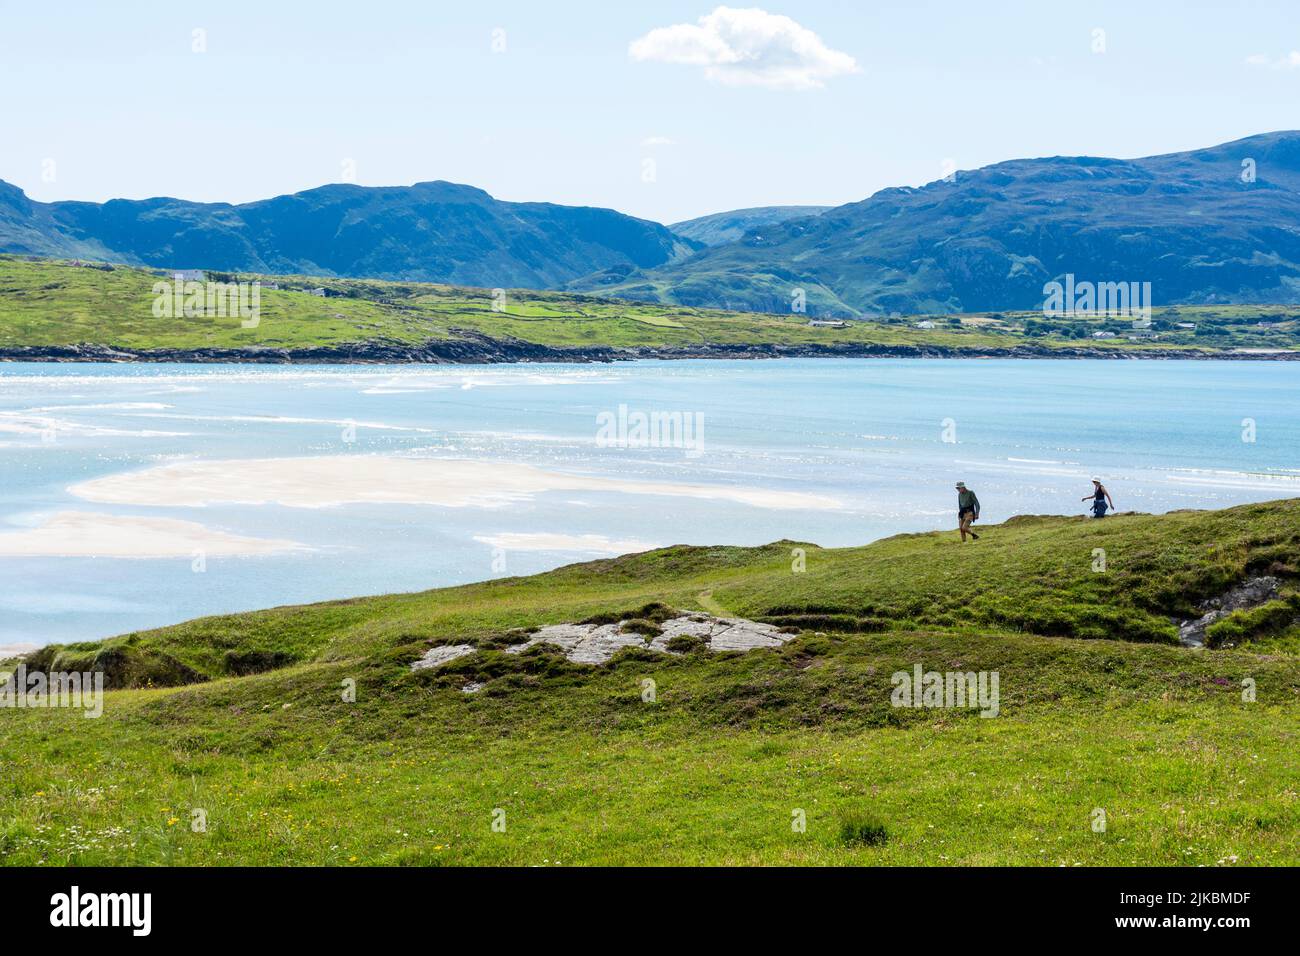 Walkers on  Sheskinmore Nature Reserve. Sheskinmore refers to a large area of sand dunes, lake and marsh that lies between Kiltooris and Ballinreavy S Stock Photo